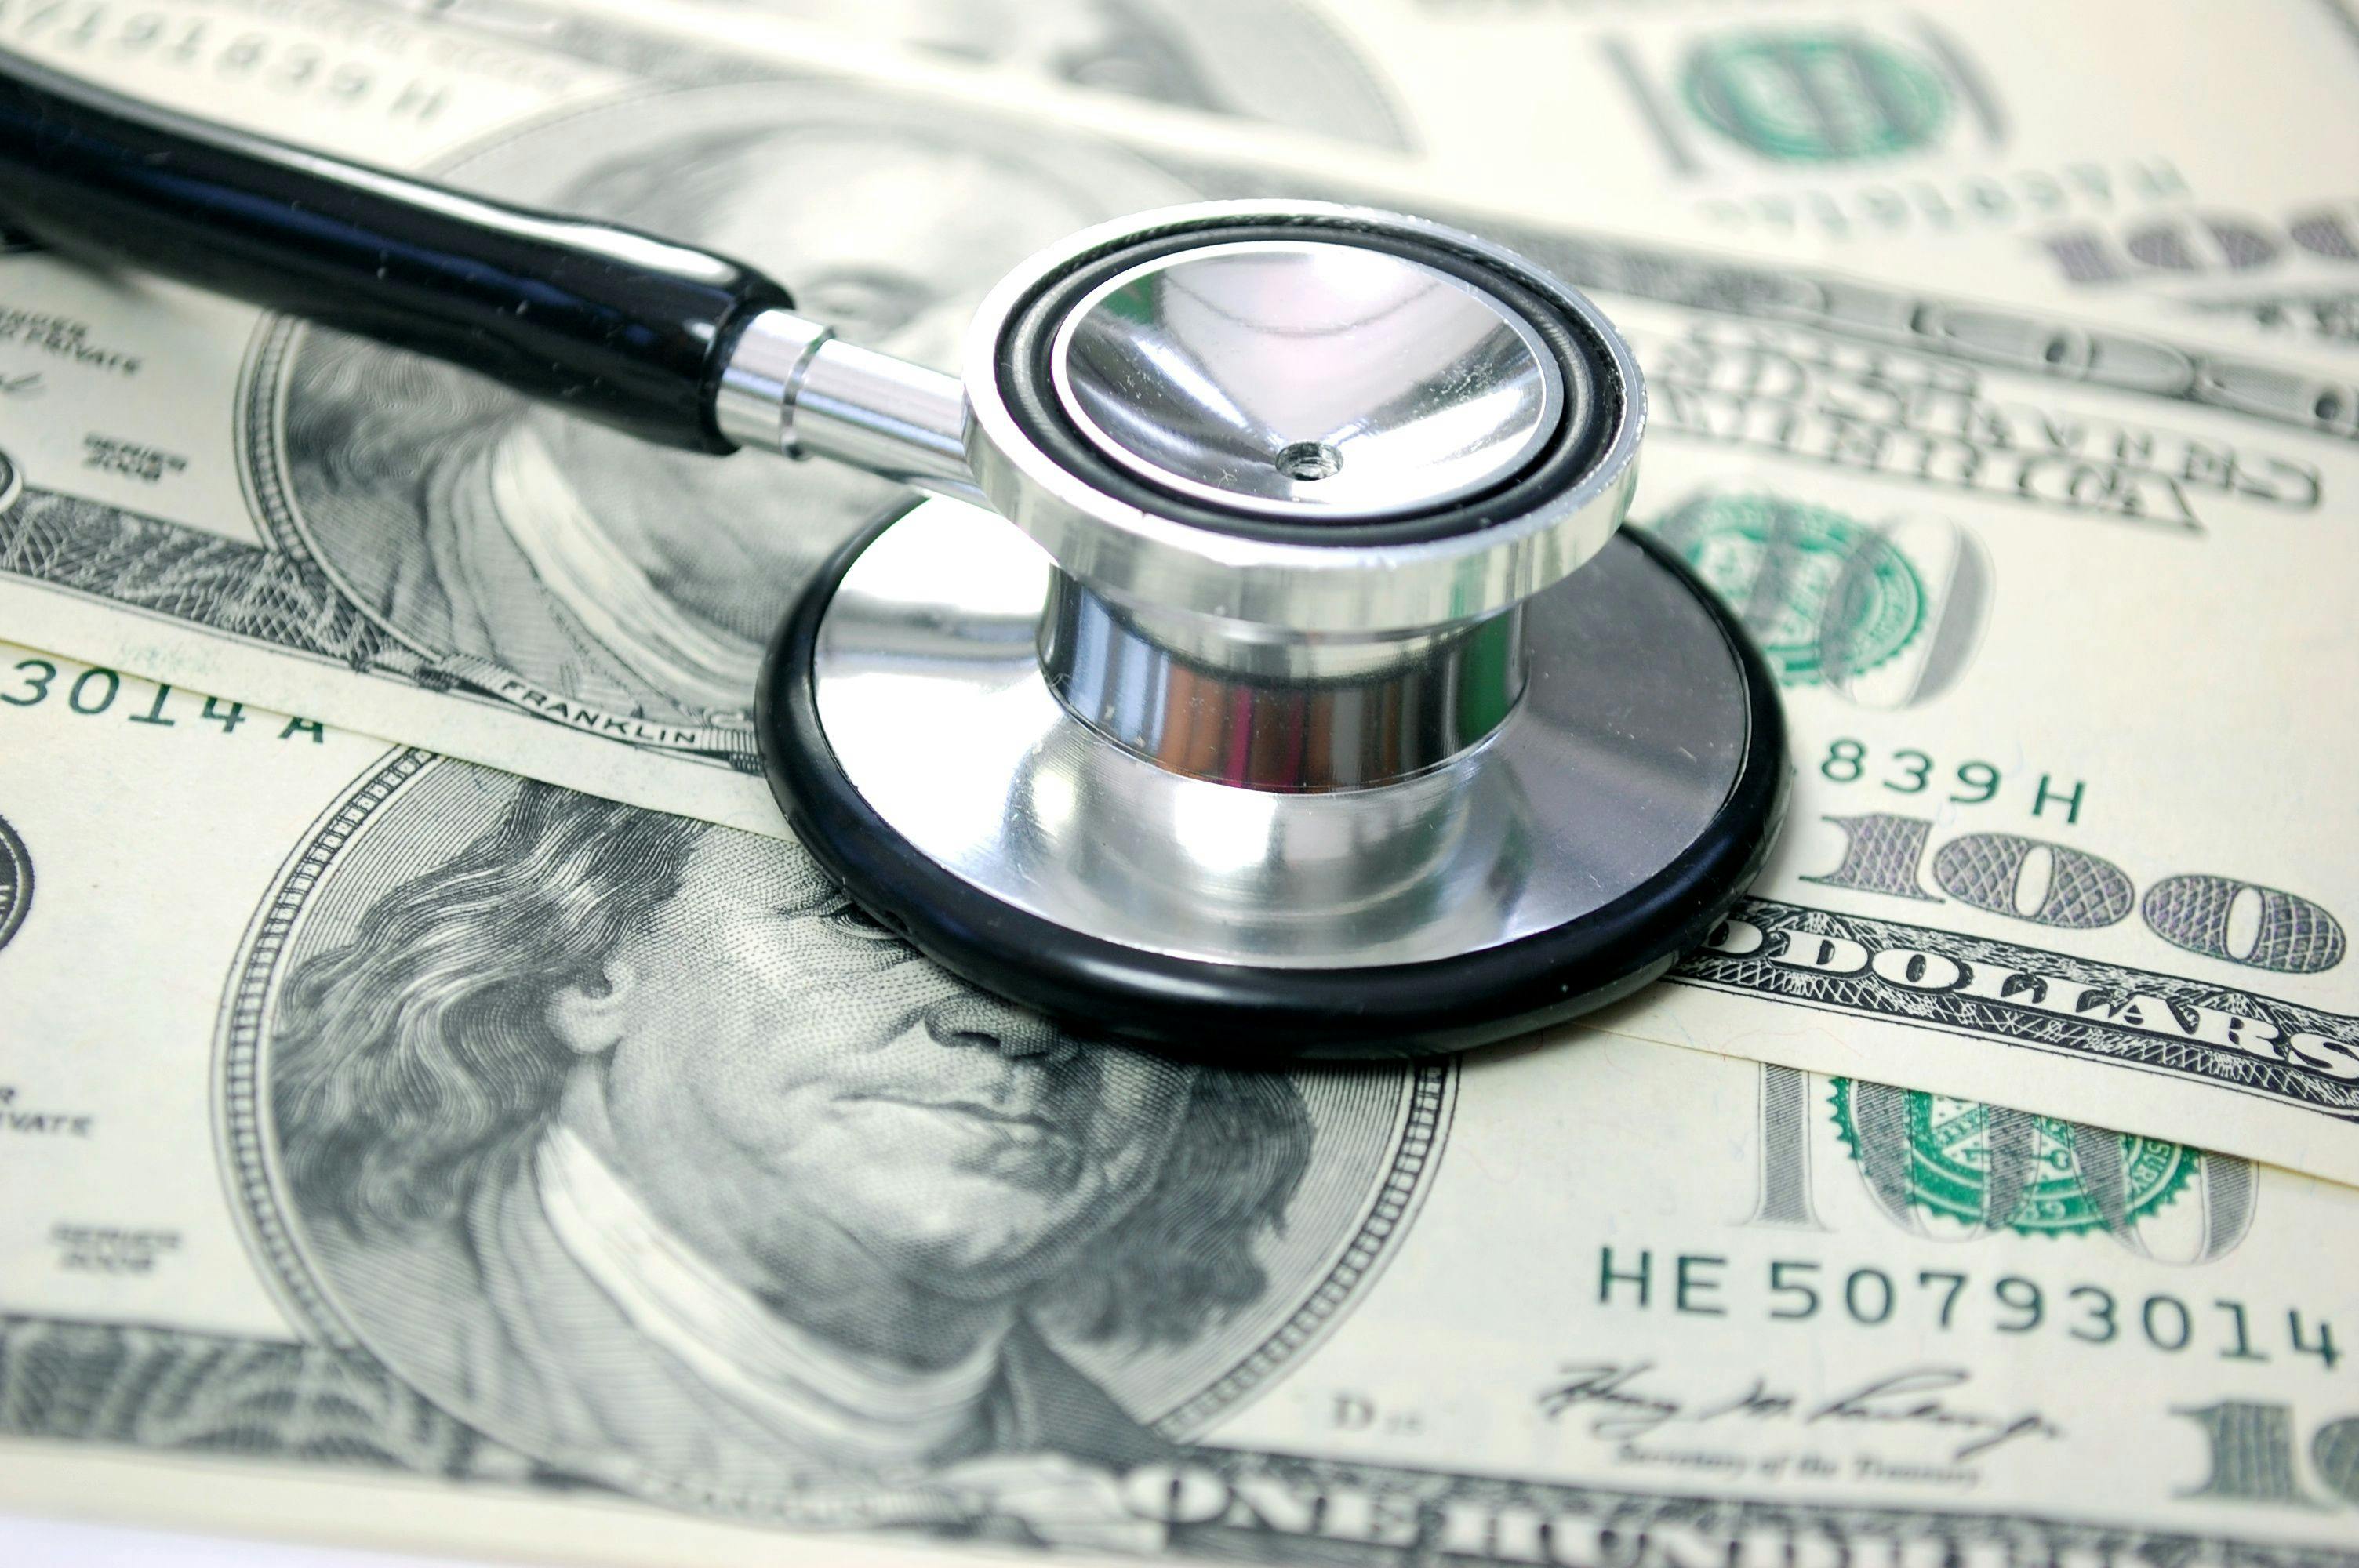 Money with a stethoscope on top | Image Credit: Pixelbliss - stock.abode.com